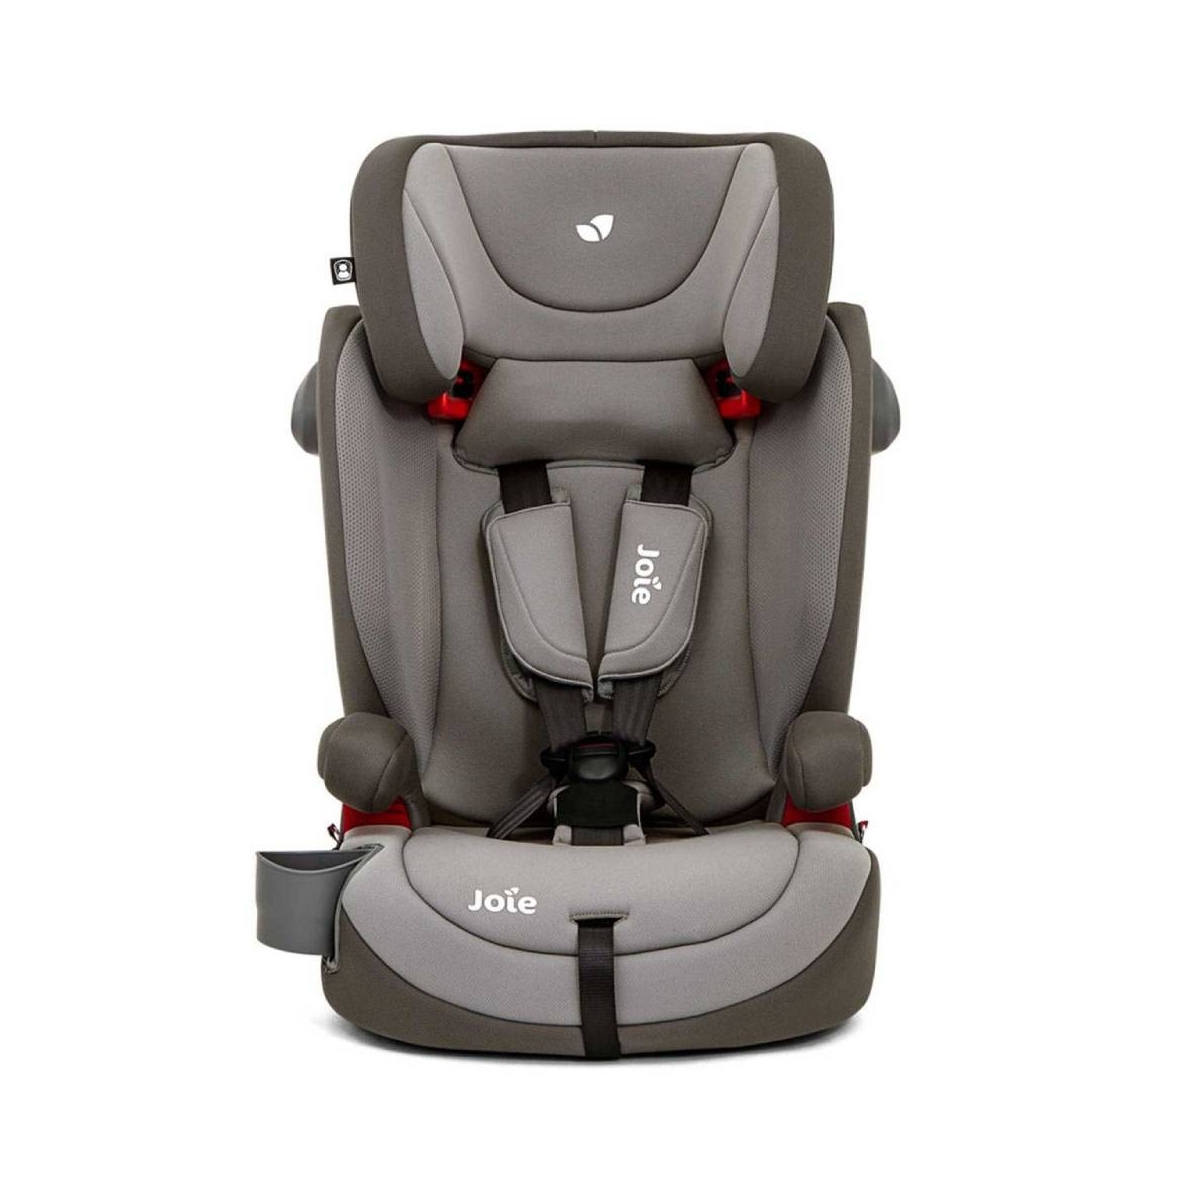 Joie Elevate 2.0 Group 1/2/3 Car Seat